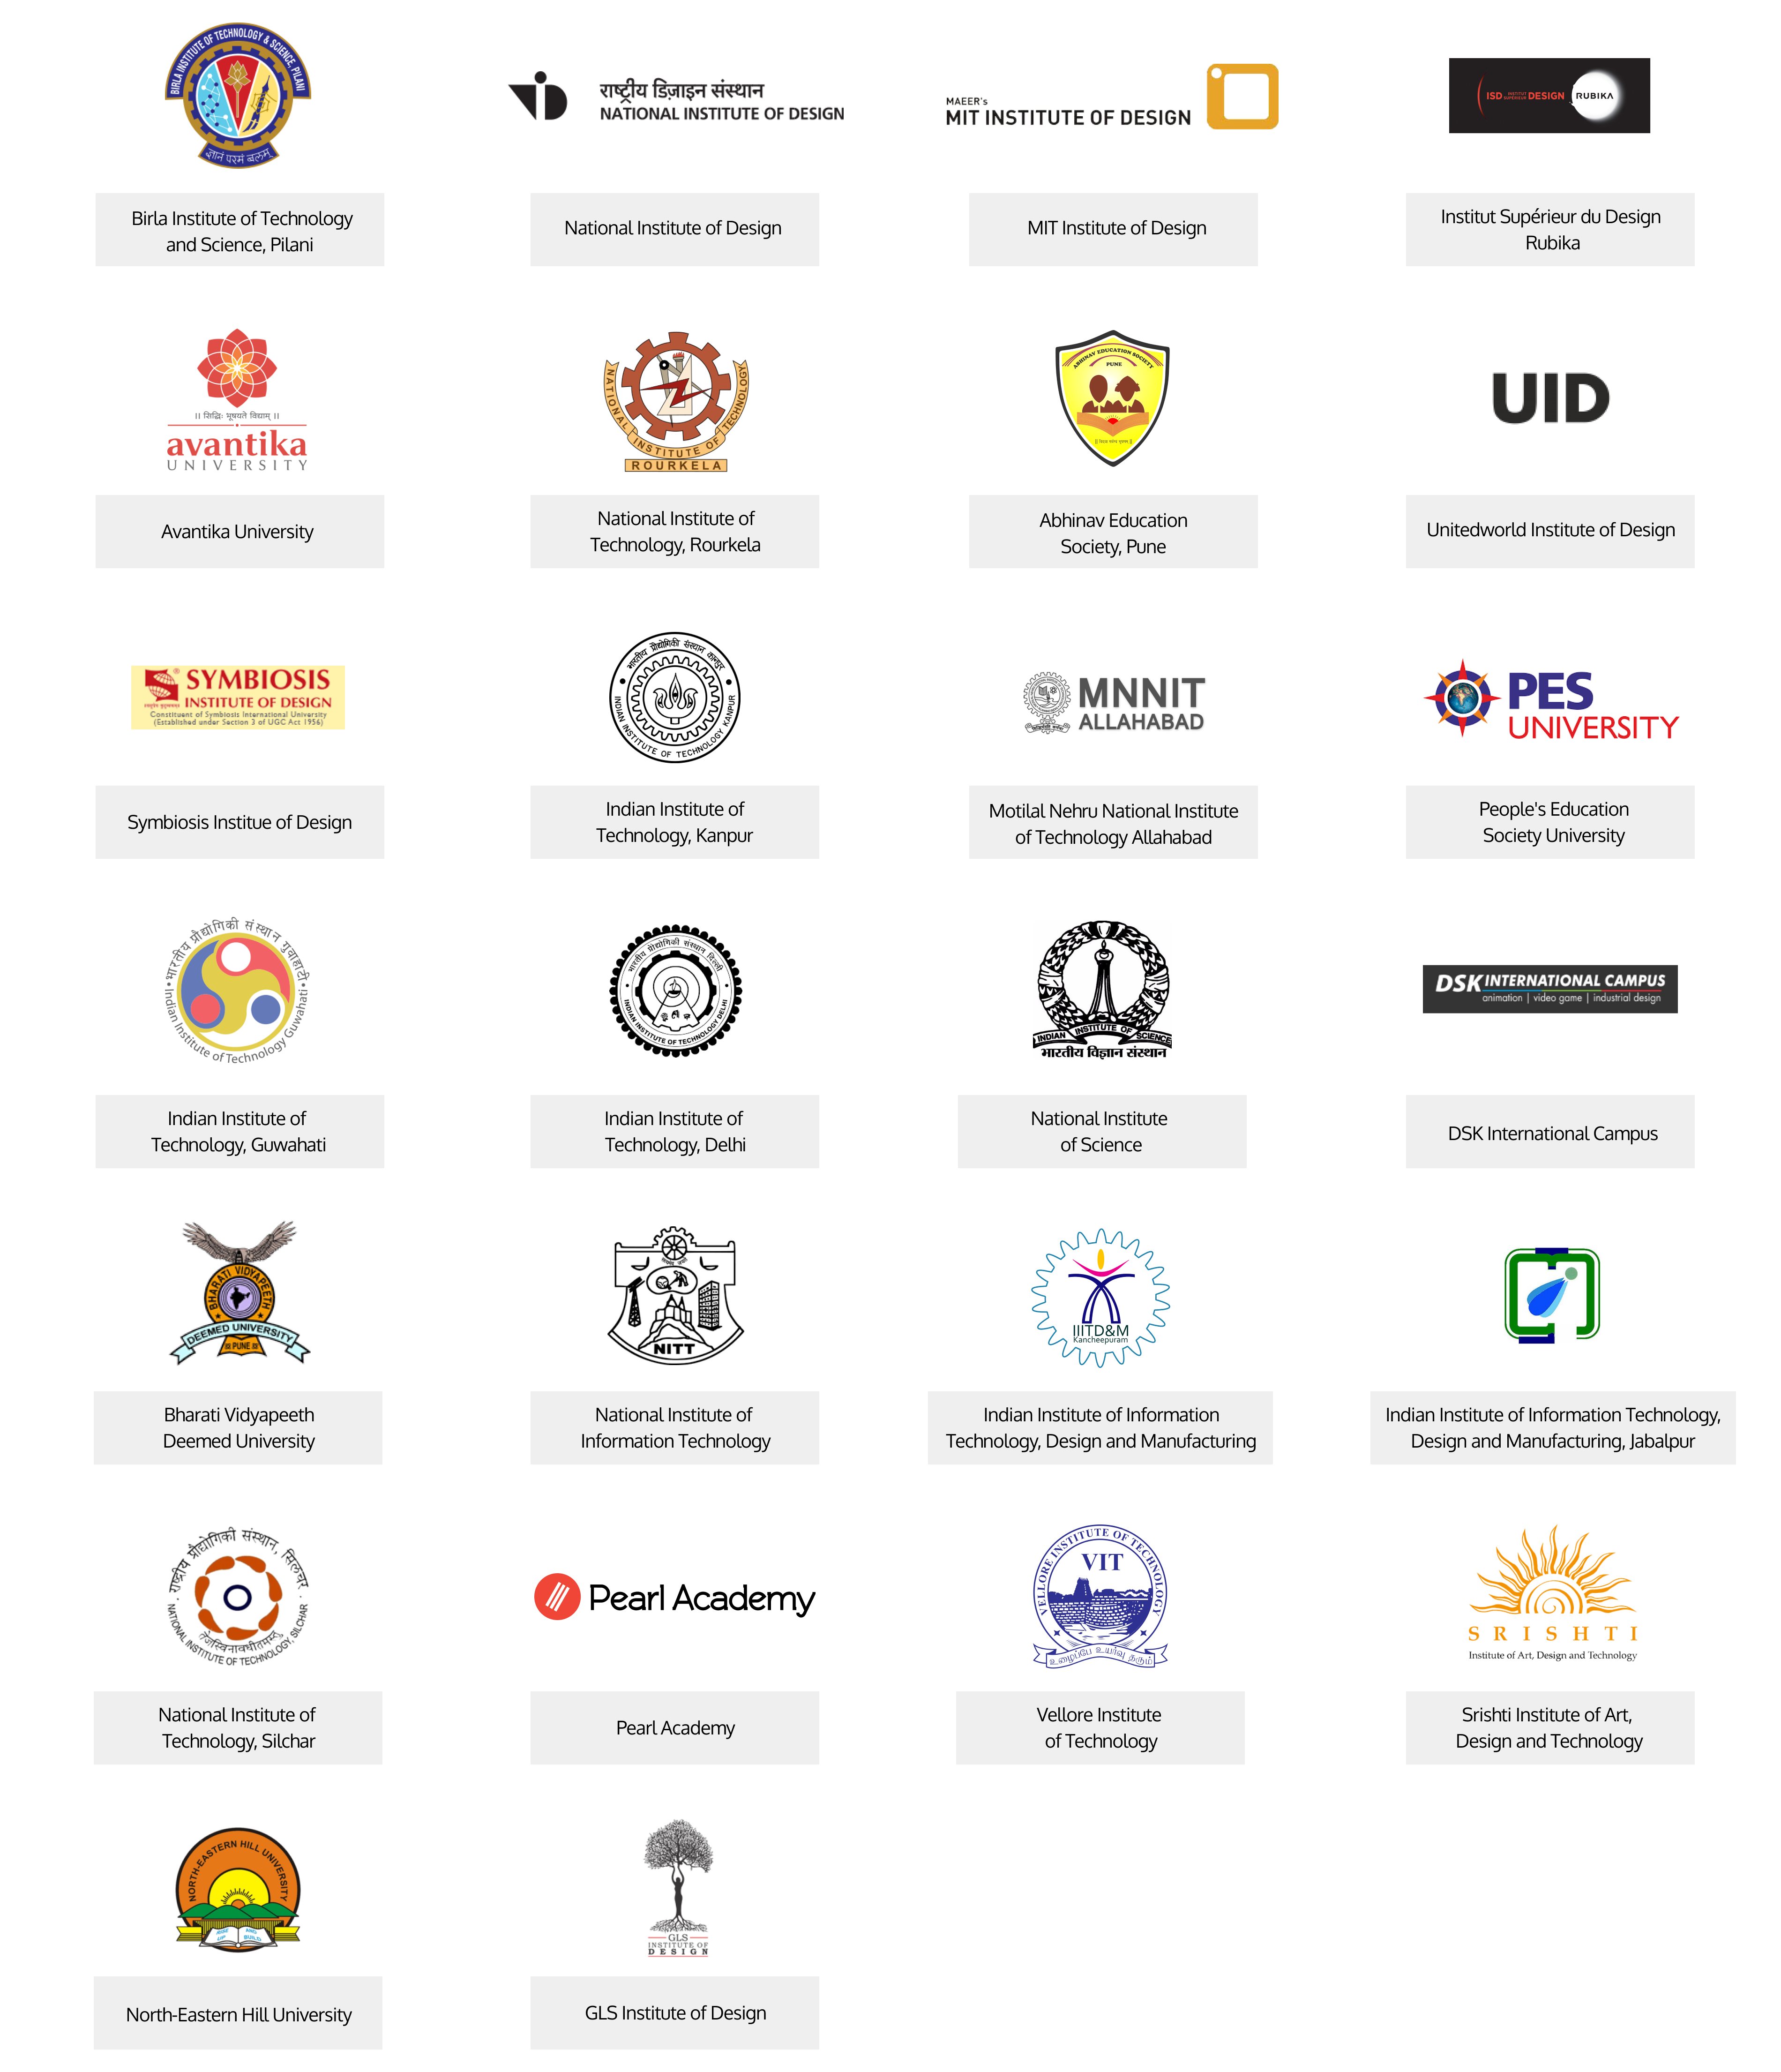 Institutes that have participated in ux design competition